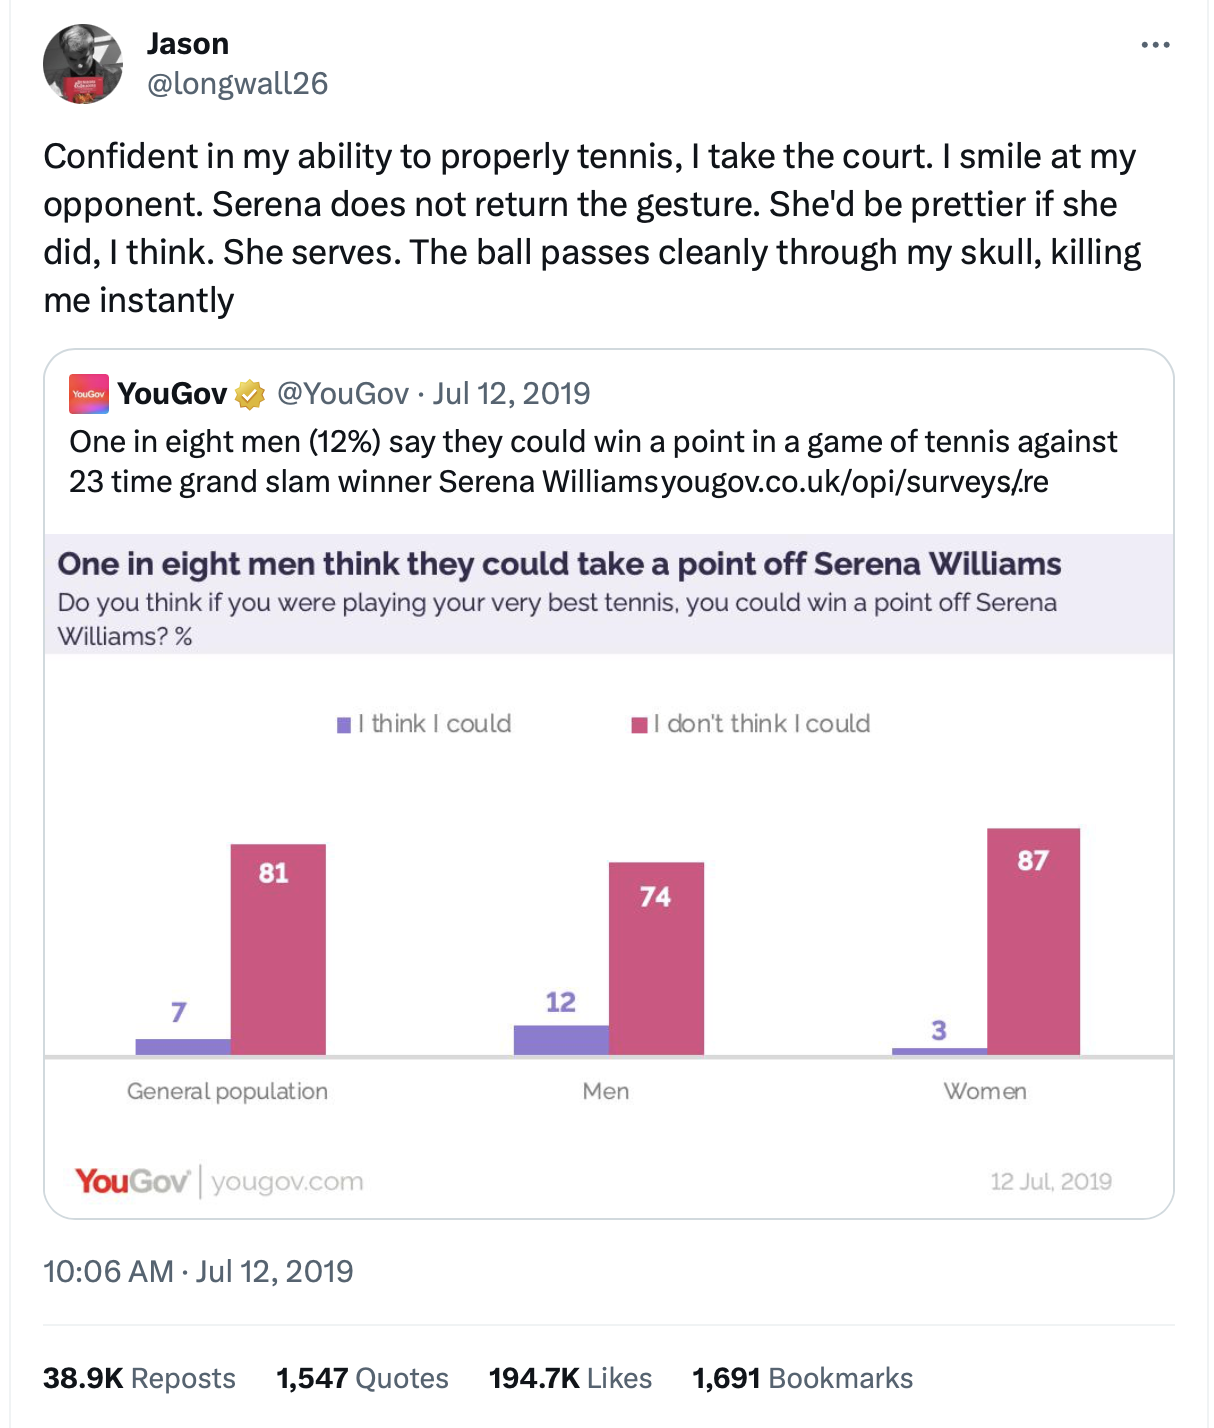 Screenshot of a quote tweet. The original tweet, from YouGov, reads “One in eight men (12%) say they could win a point in a game of tennis against 23 time grand slam winner Serena Williams”. The quote tweet, from Jason, reads “Confident in my ability to properly tennis, I take the court. I smile at my opponent. Serena does not return the gesture. She'd be prettier if she did, I think. She serves. The ball passes cleanly through my skull, killing me instantly”